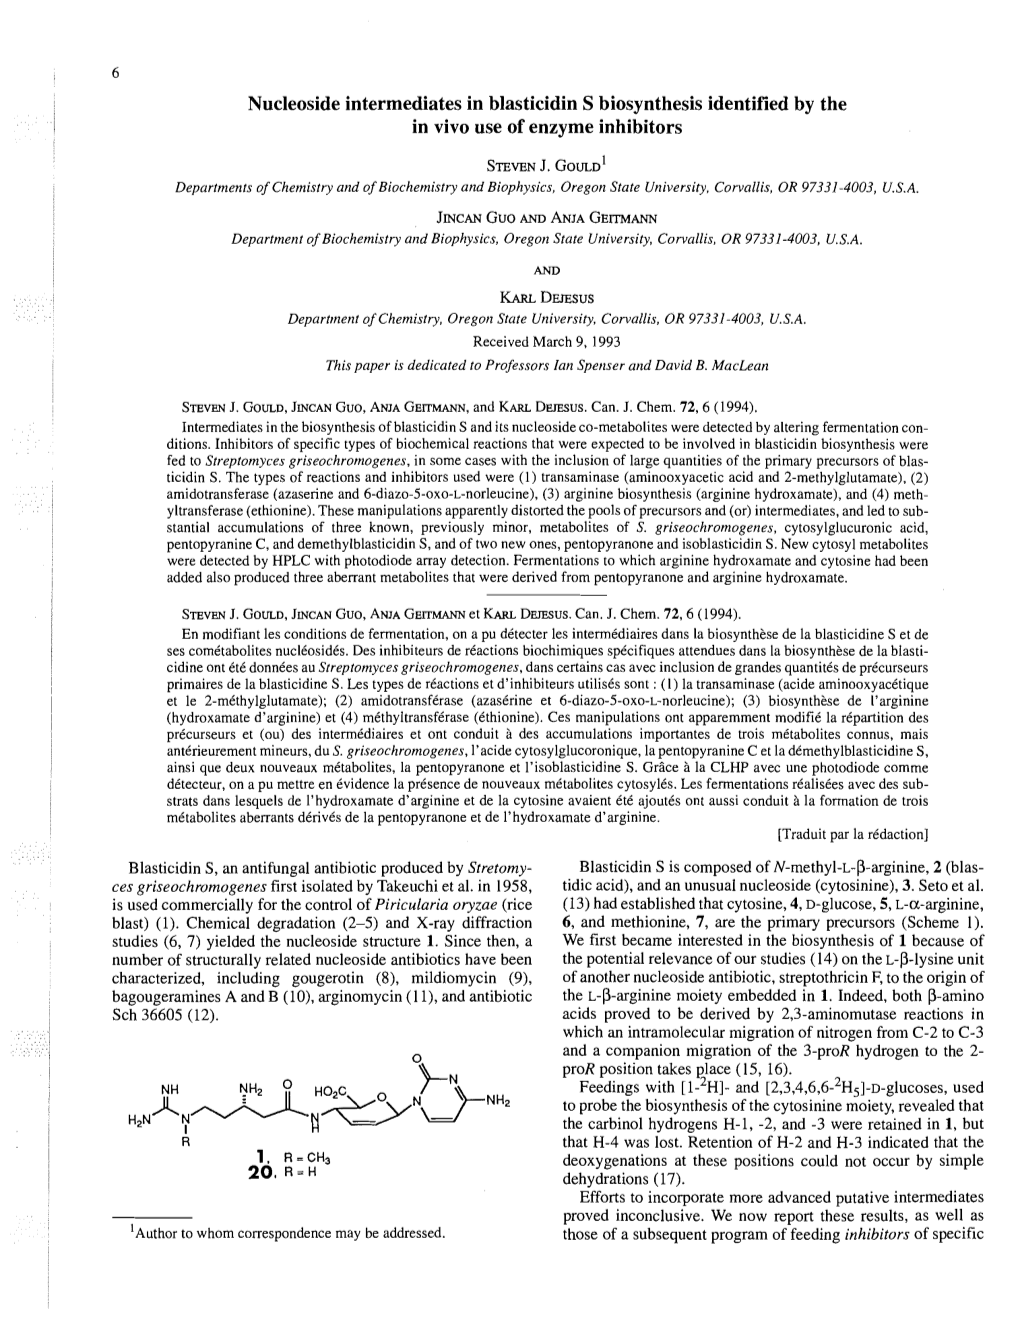 Nucleoside Intermediates in Blasticidin S Biosynthesis Identified by the in Vivo Use of Enzyme Inhibitors